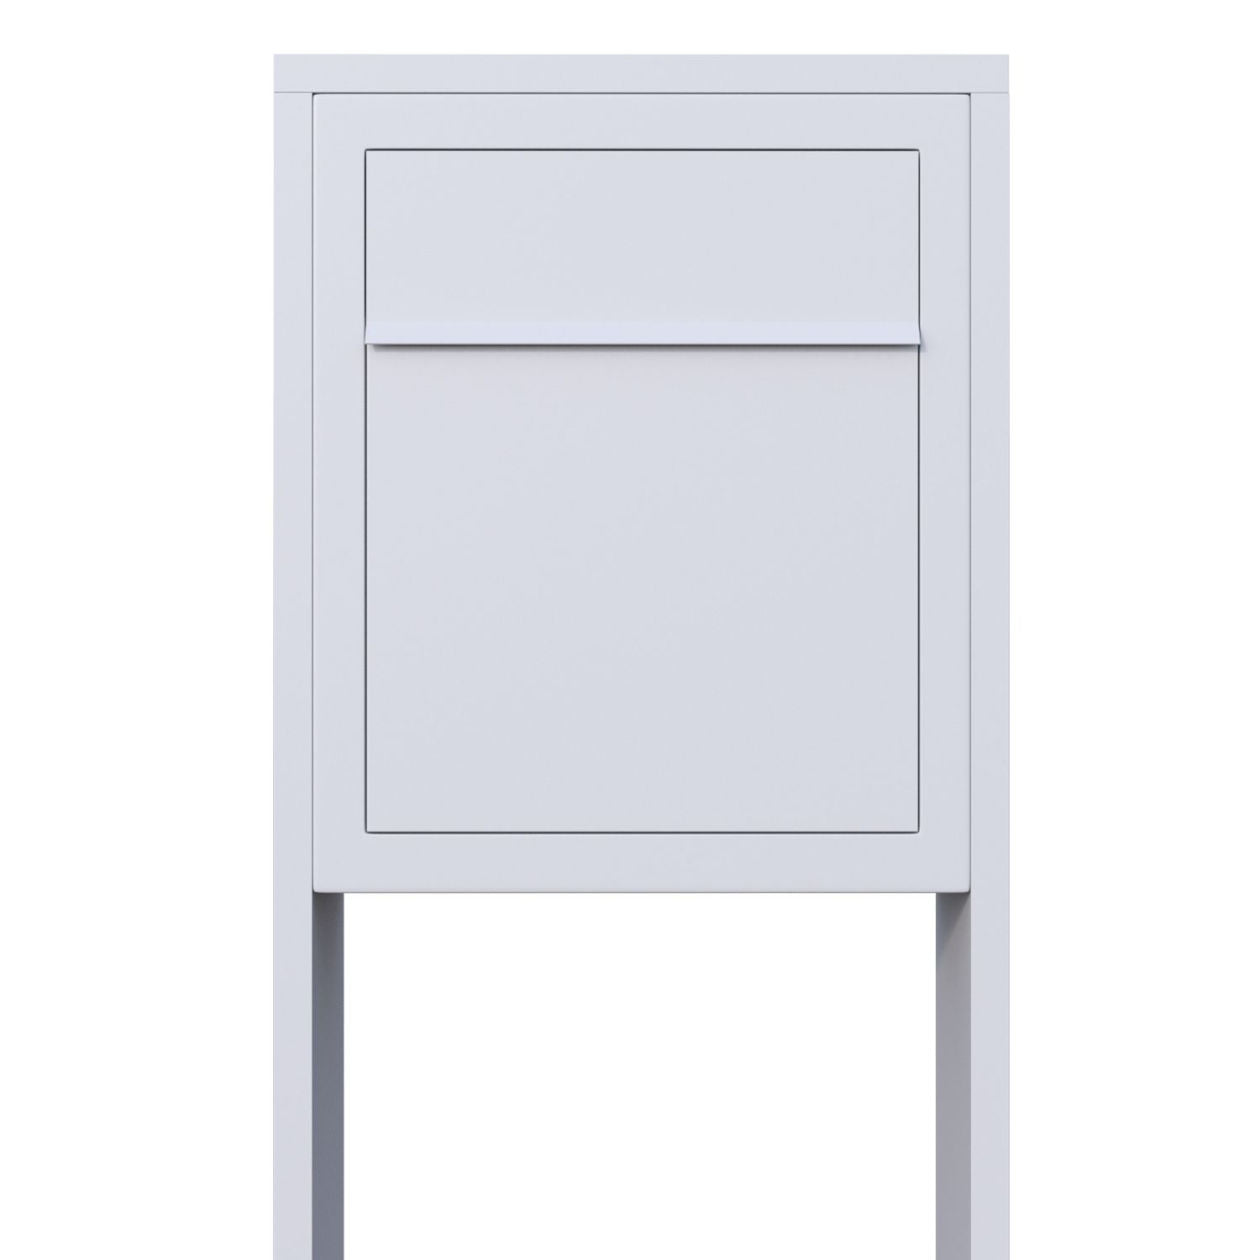 STAND BASE by Bravios - Modern post-mounted white mailbox